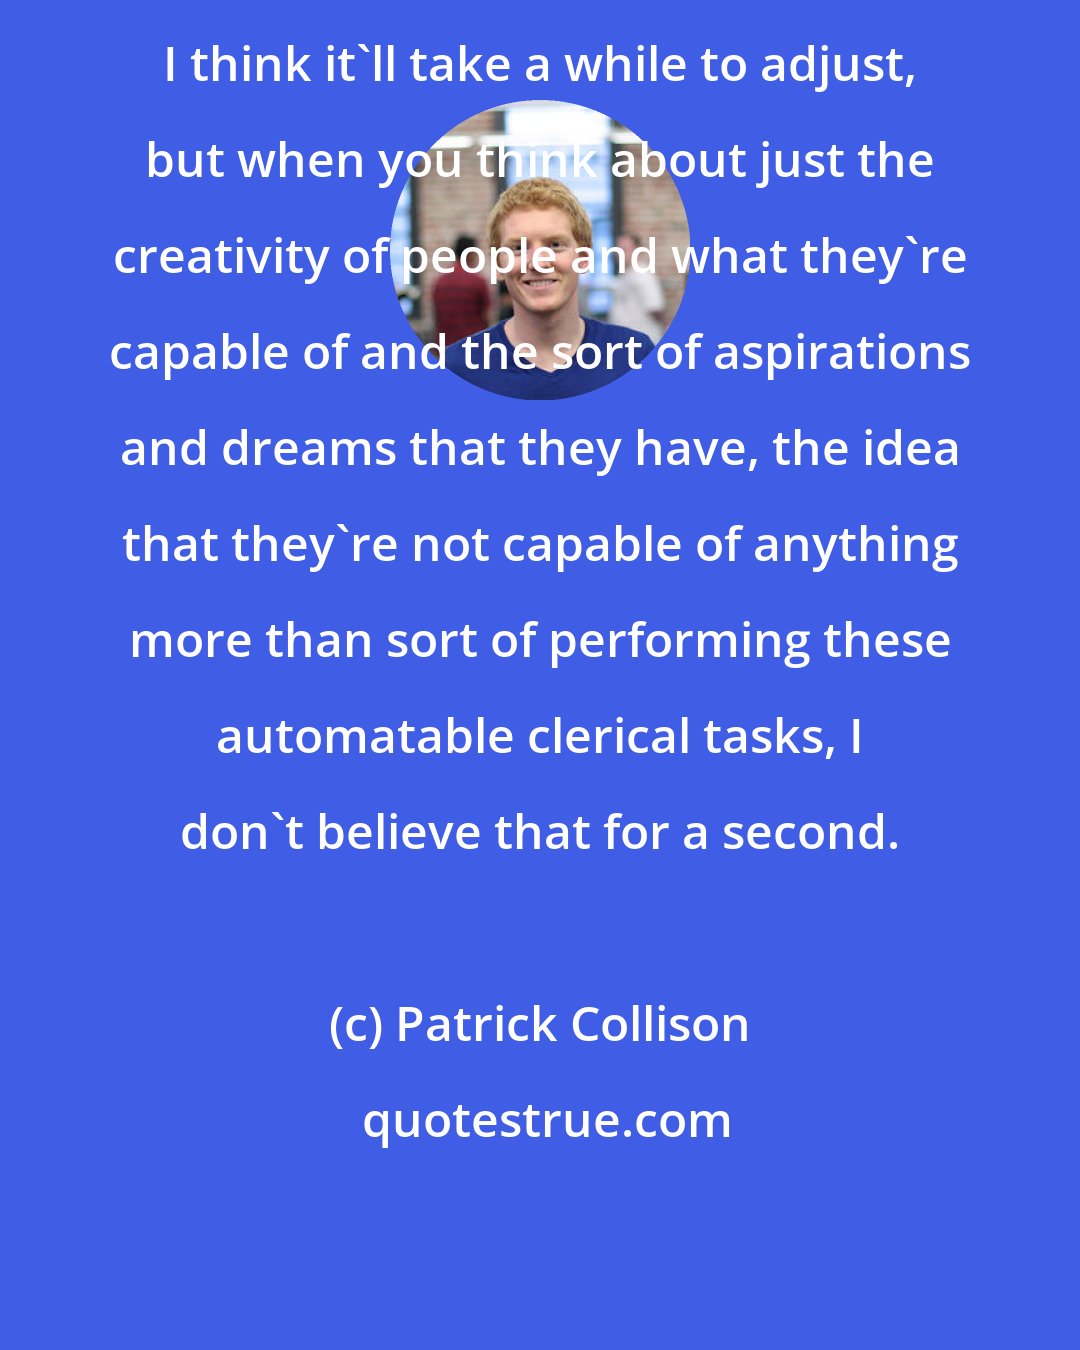 Patrick Collison: I think it'll take a while to adjust, but when you think about just the creativity of people and what they're capable of and the sort of aspirations and dreams that they have, the idea that they're not capable of anything more than sort of performing these automatable clerical tasks, I don't believe that for a second.